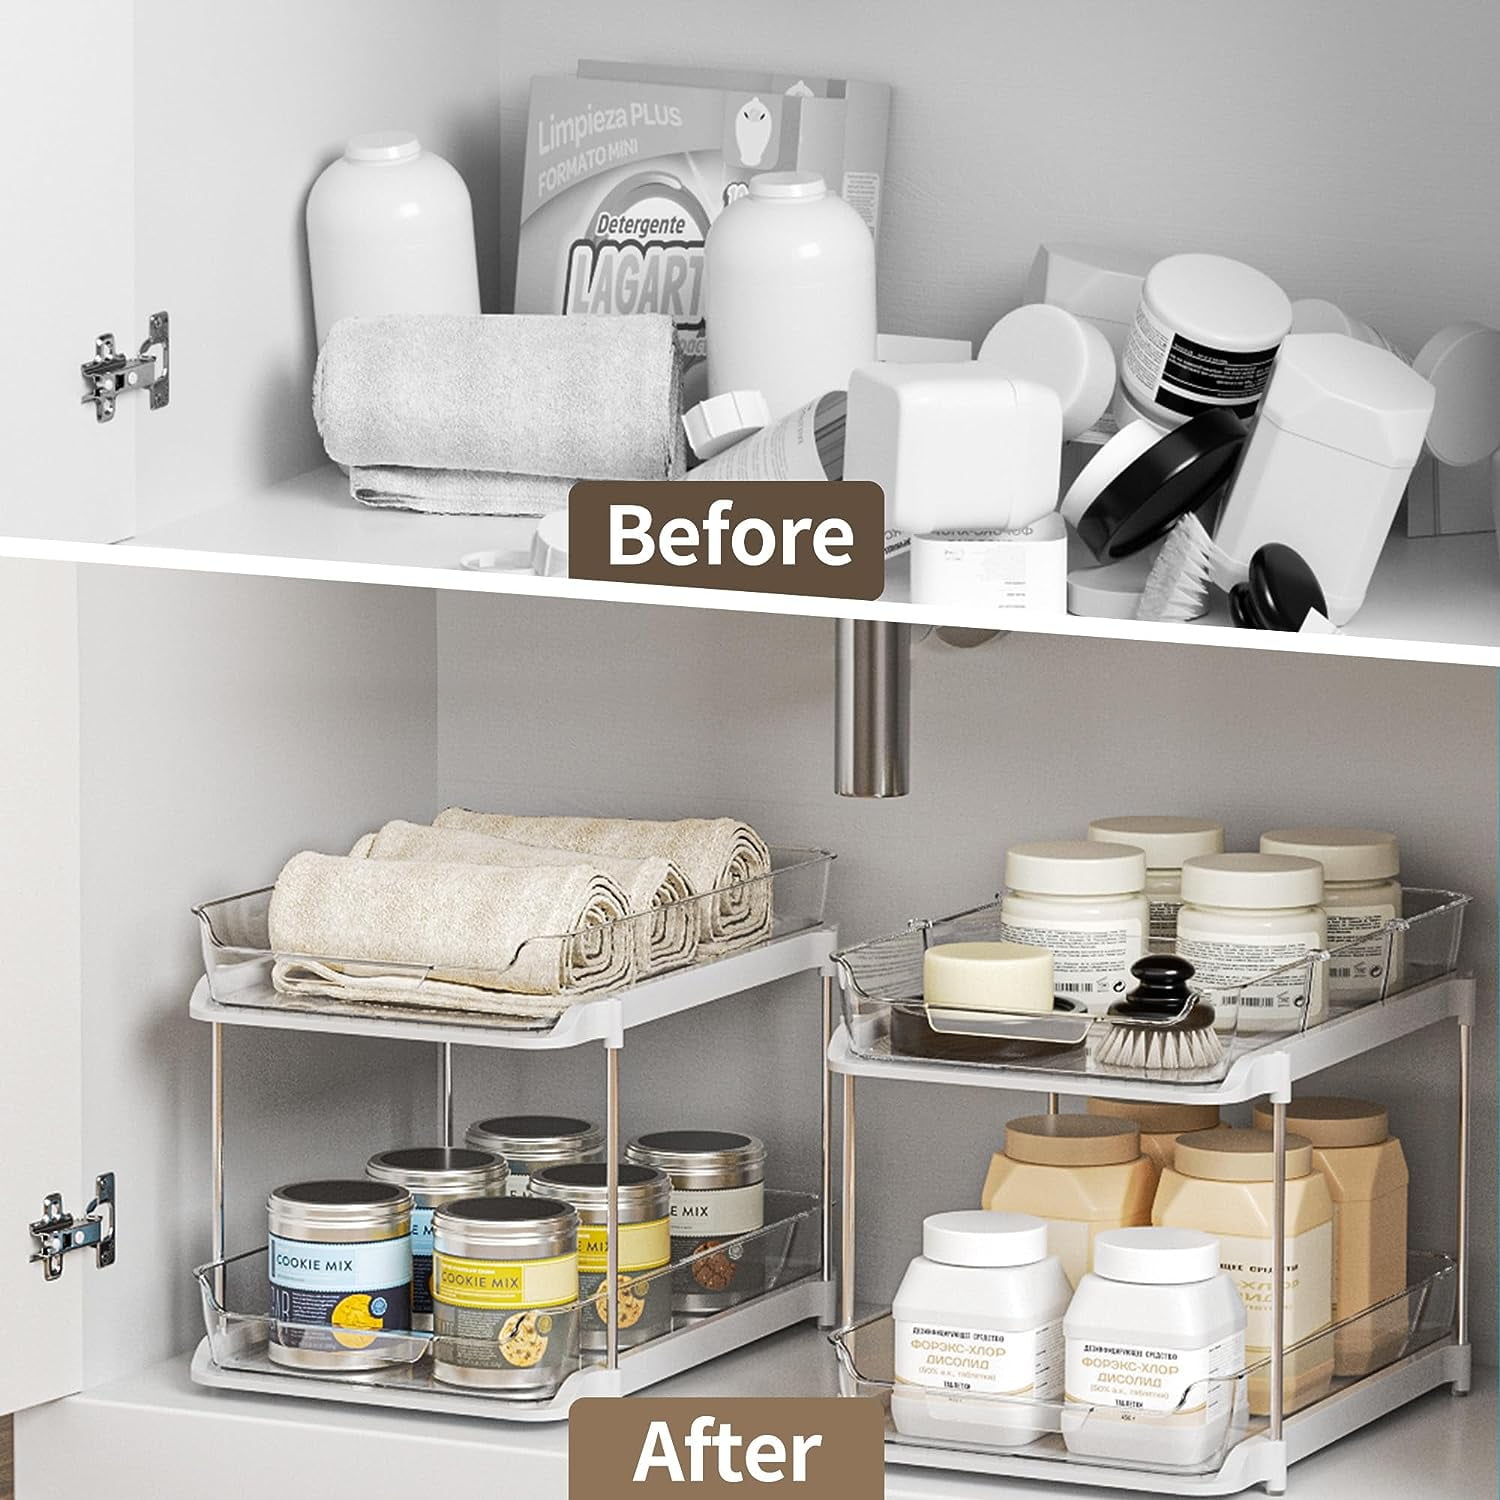 Pantry Organization 101 [Step by Step] - Shuangy's Kitchen Sink